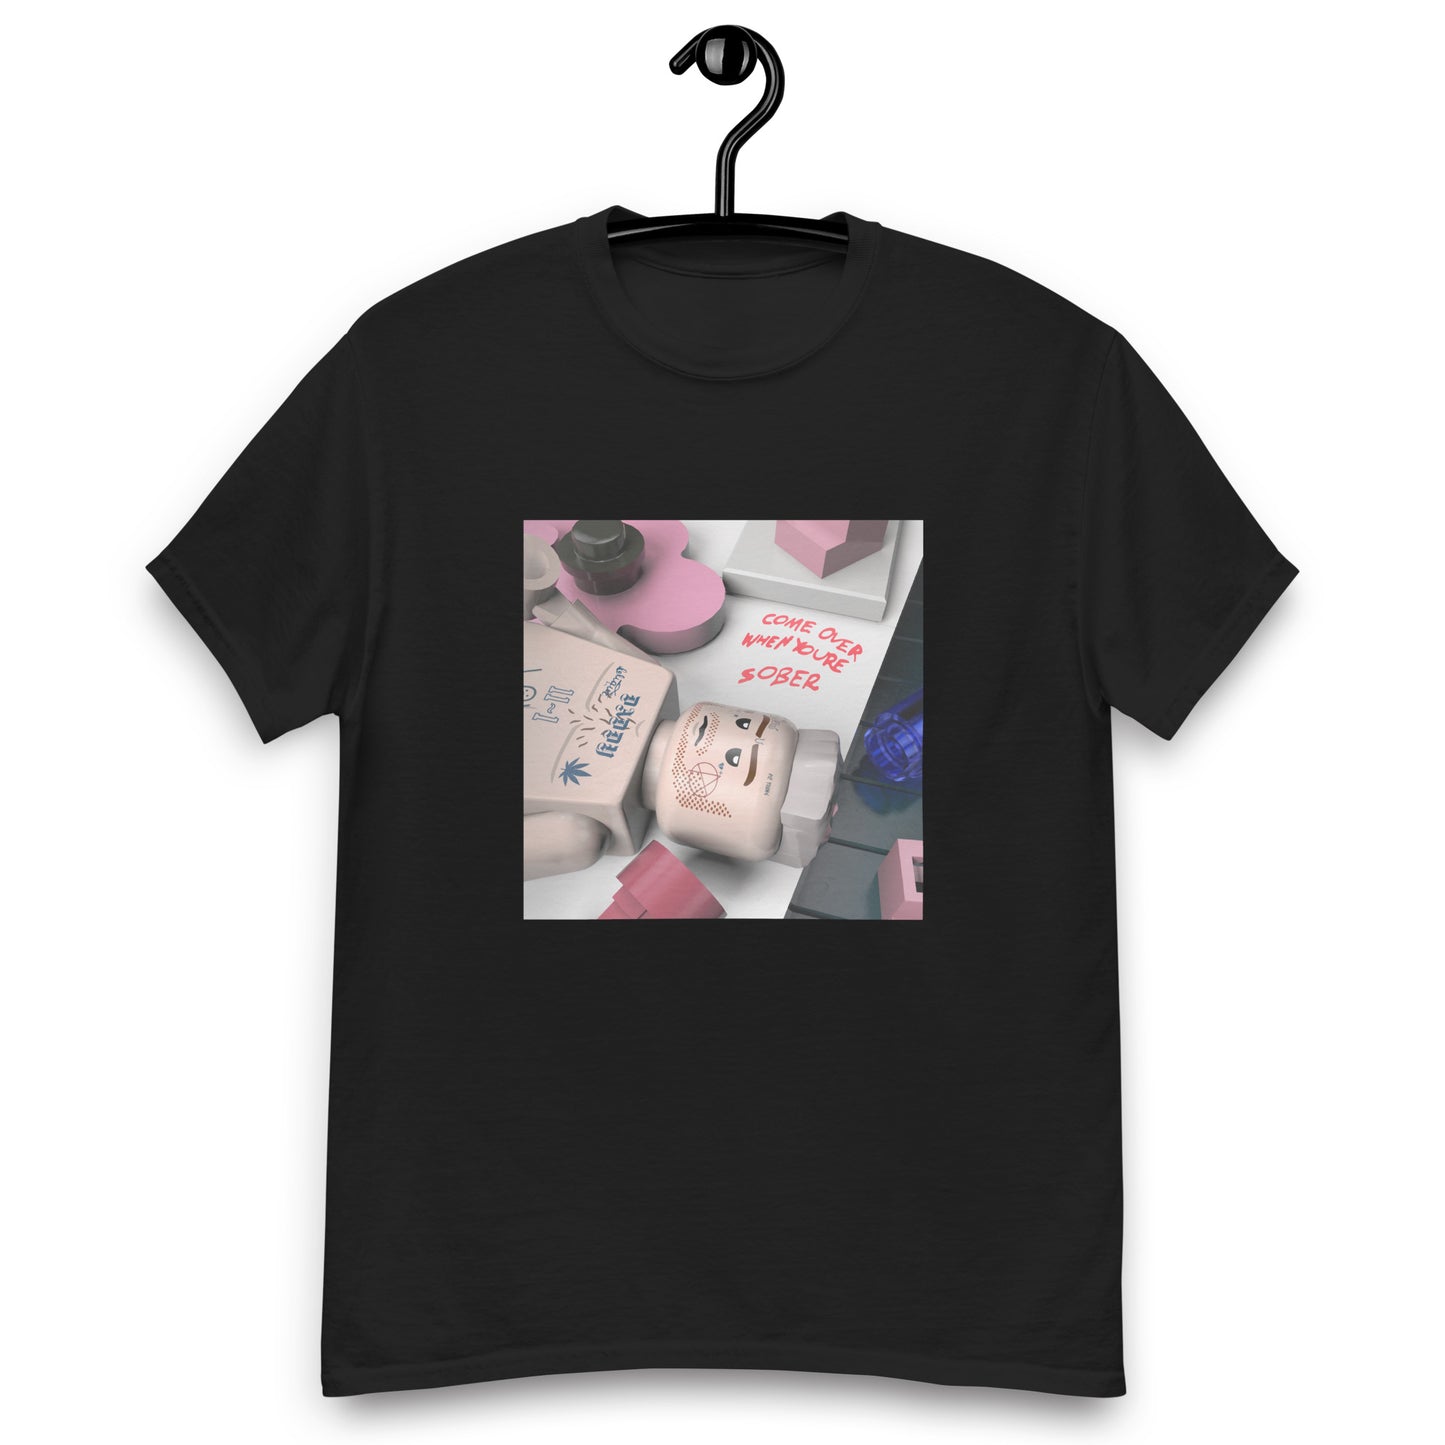 "Lil Peep - Come Over When You're Sober, Pt. 1" Lego Parody Tshirt